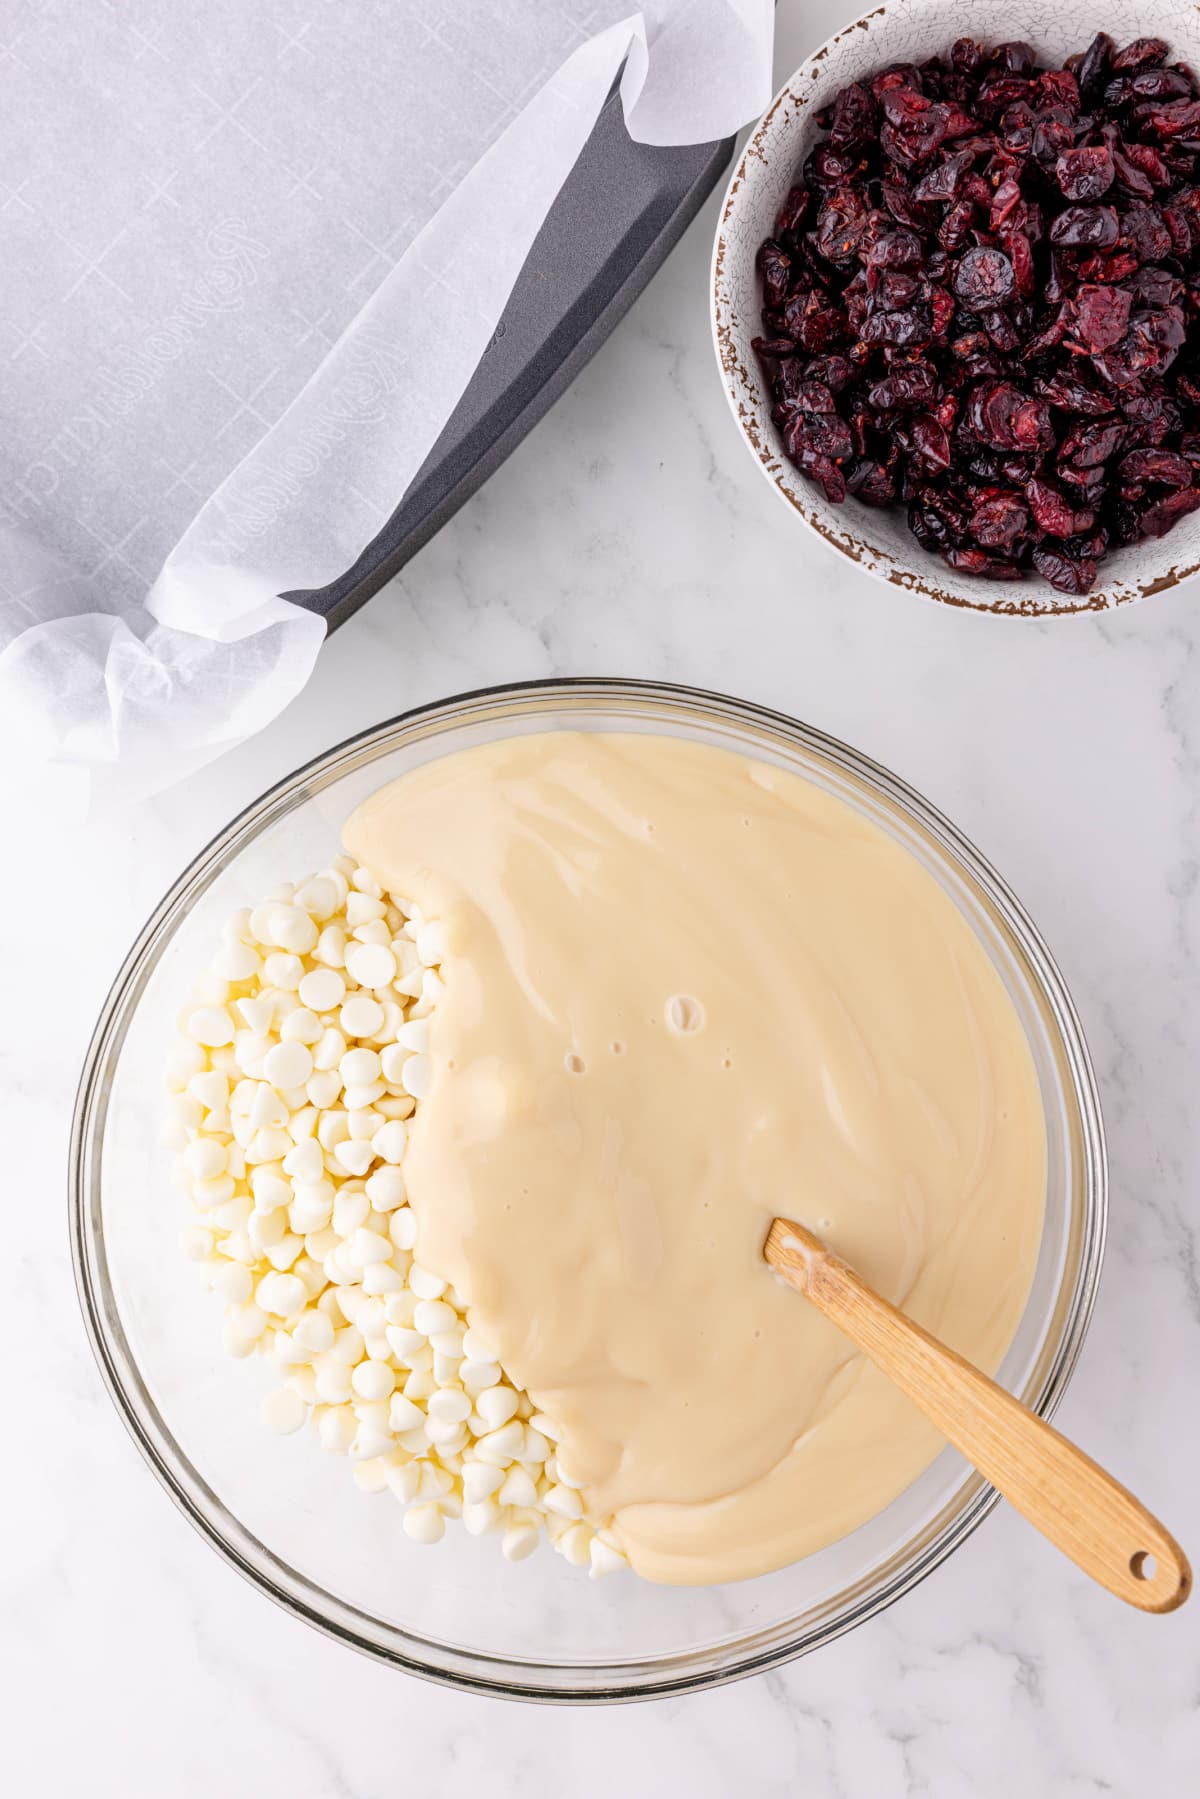 white chocolate chips melting in a glass bowl on a counter with a bowl of dried cranberries to the side